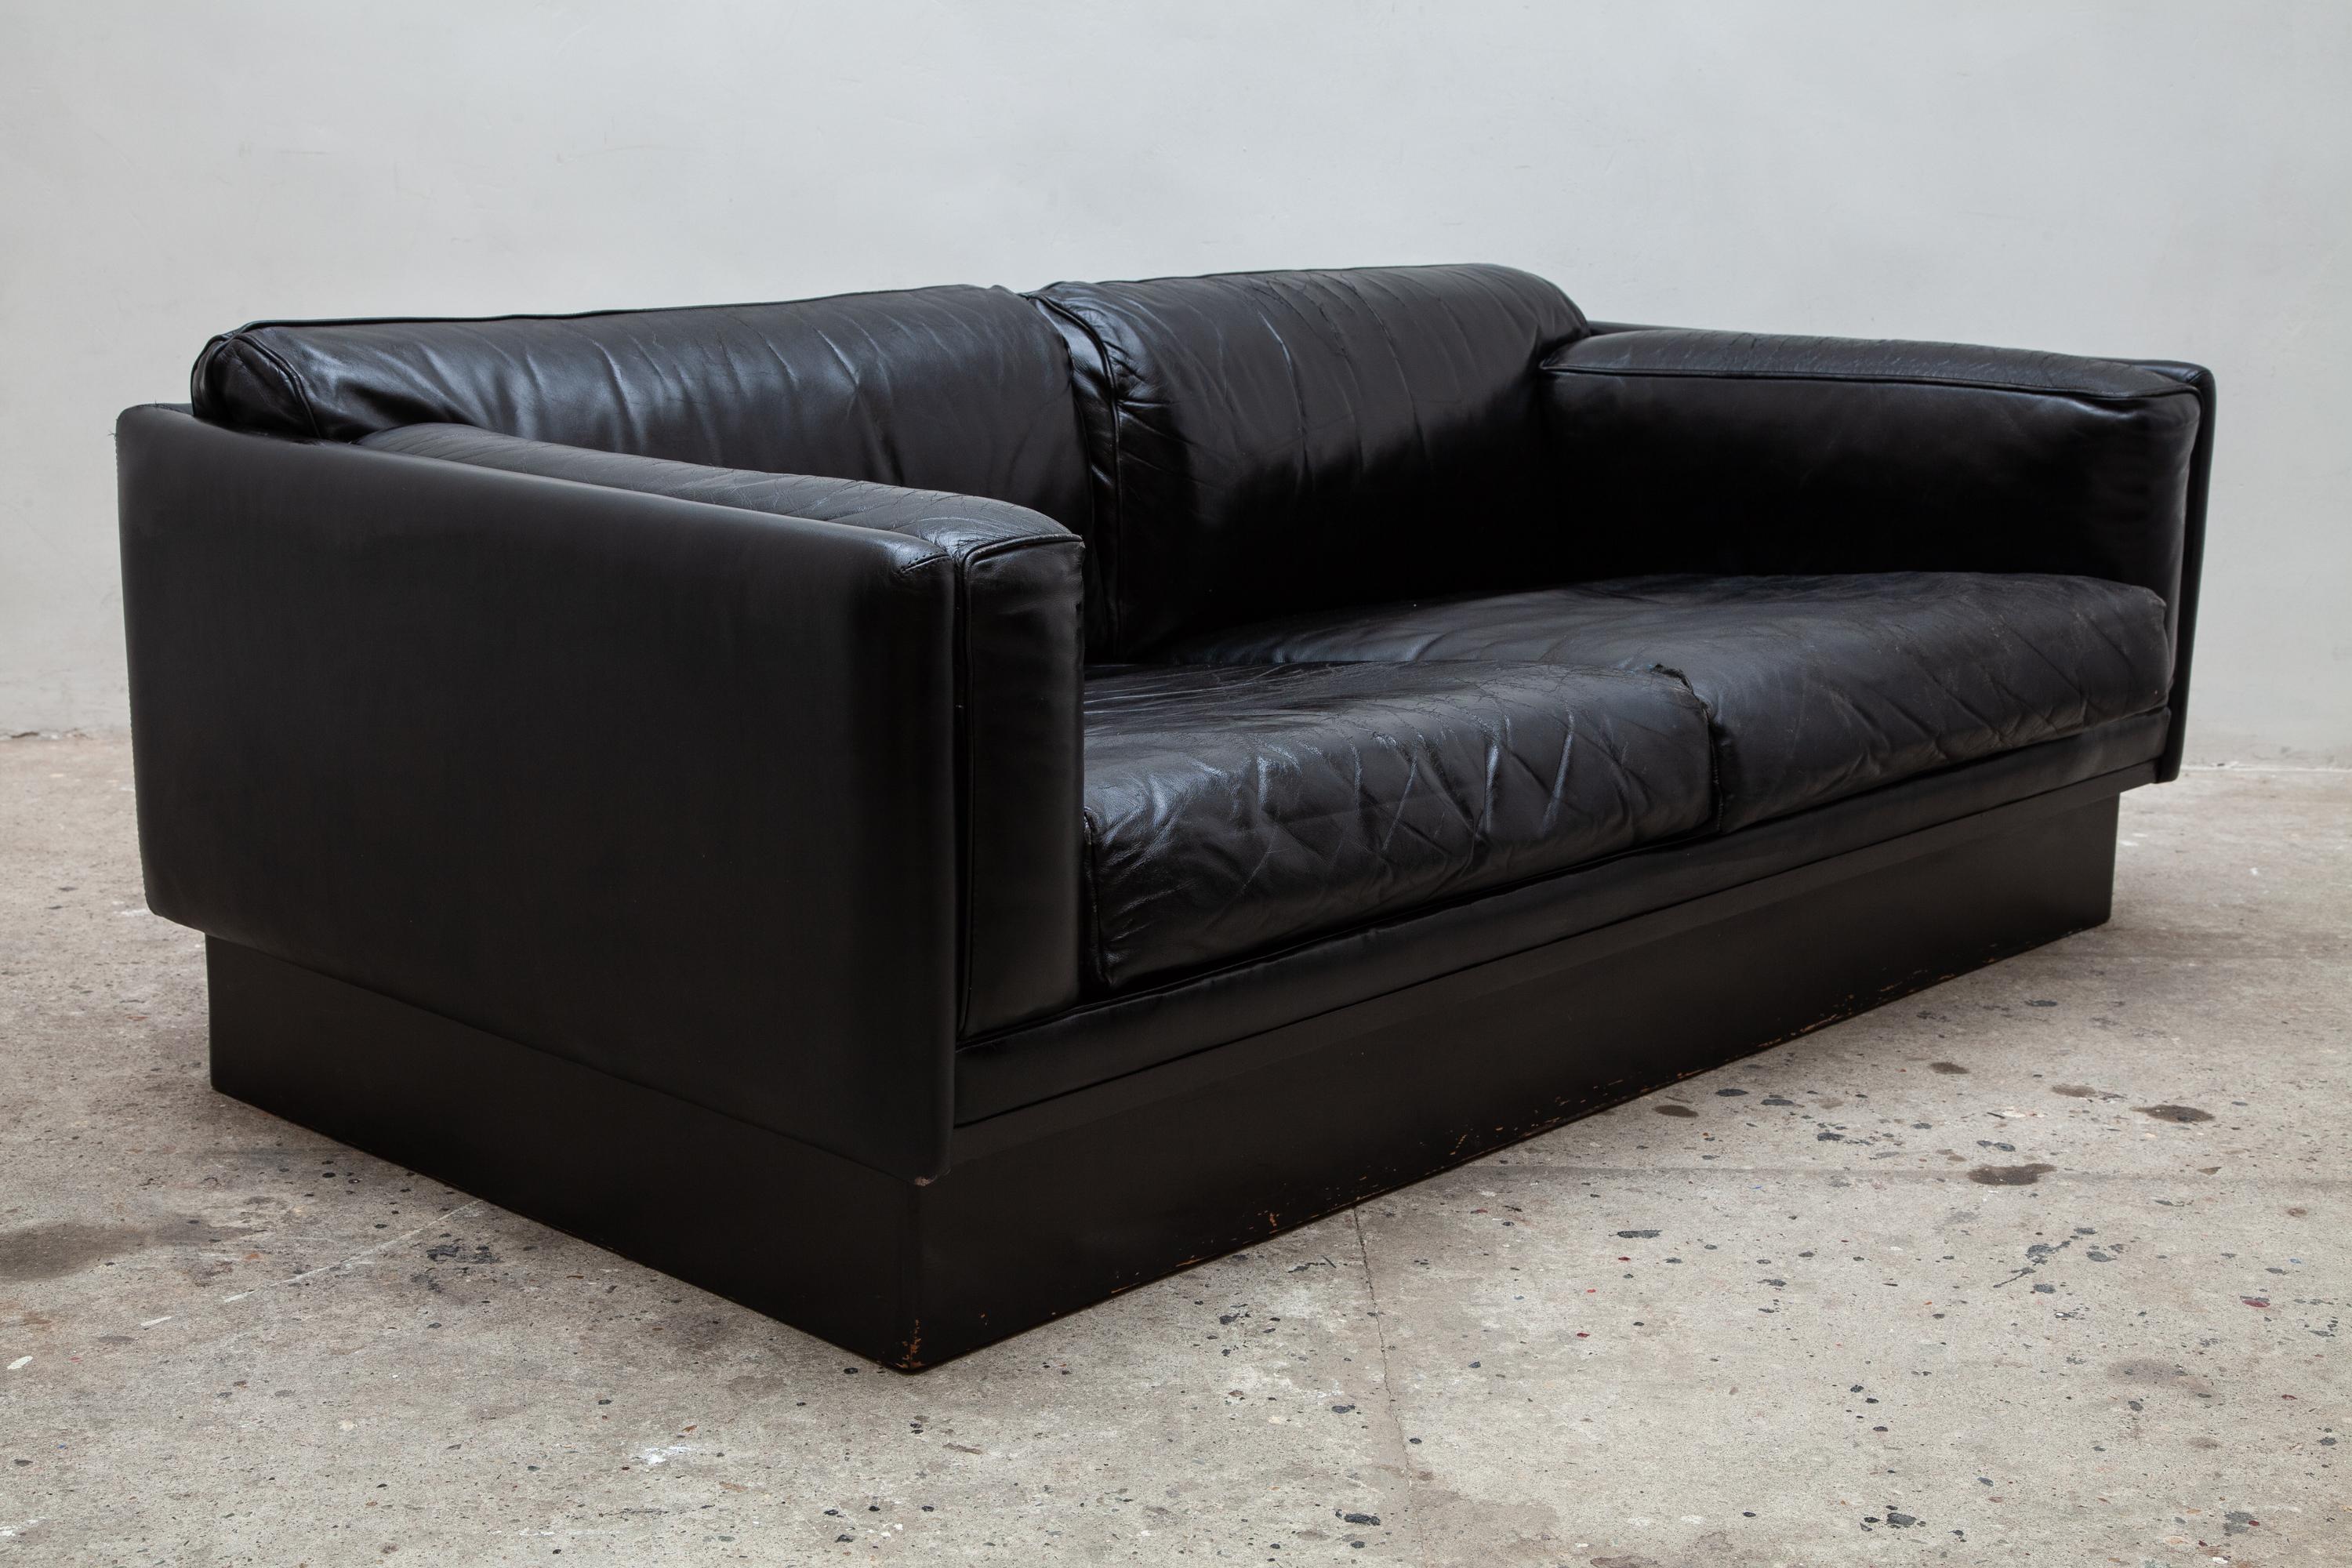 Stylish 1970s black leather couche, loveseat.
This Belgian design features a platform base, metal ball casters and wood lattice support for the seat.
Soft durable leather with vintage patina. Bolster pillows for added design and comfort.
   